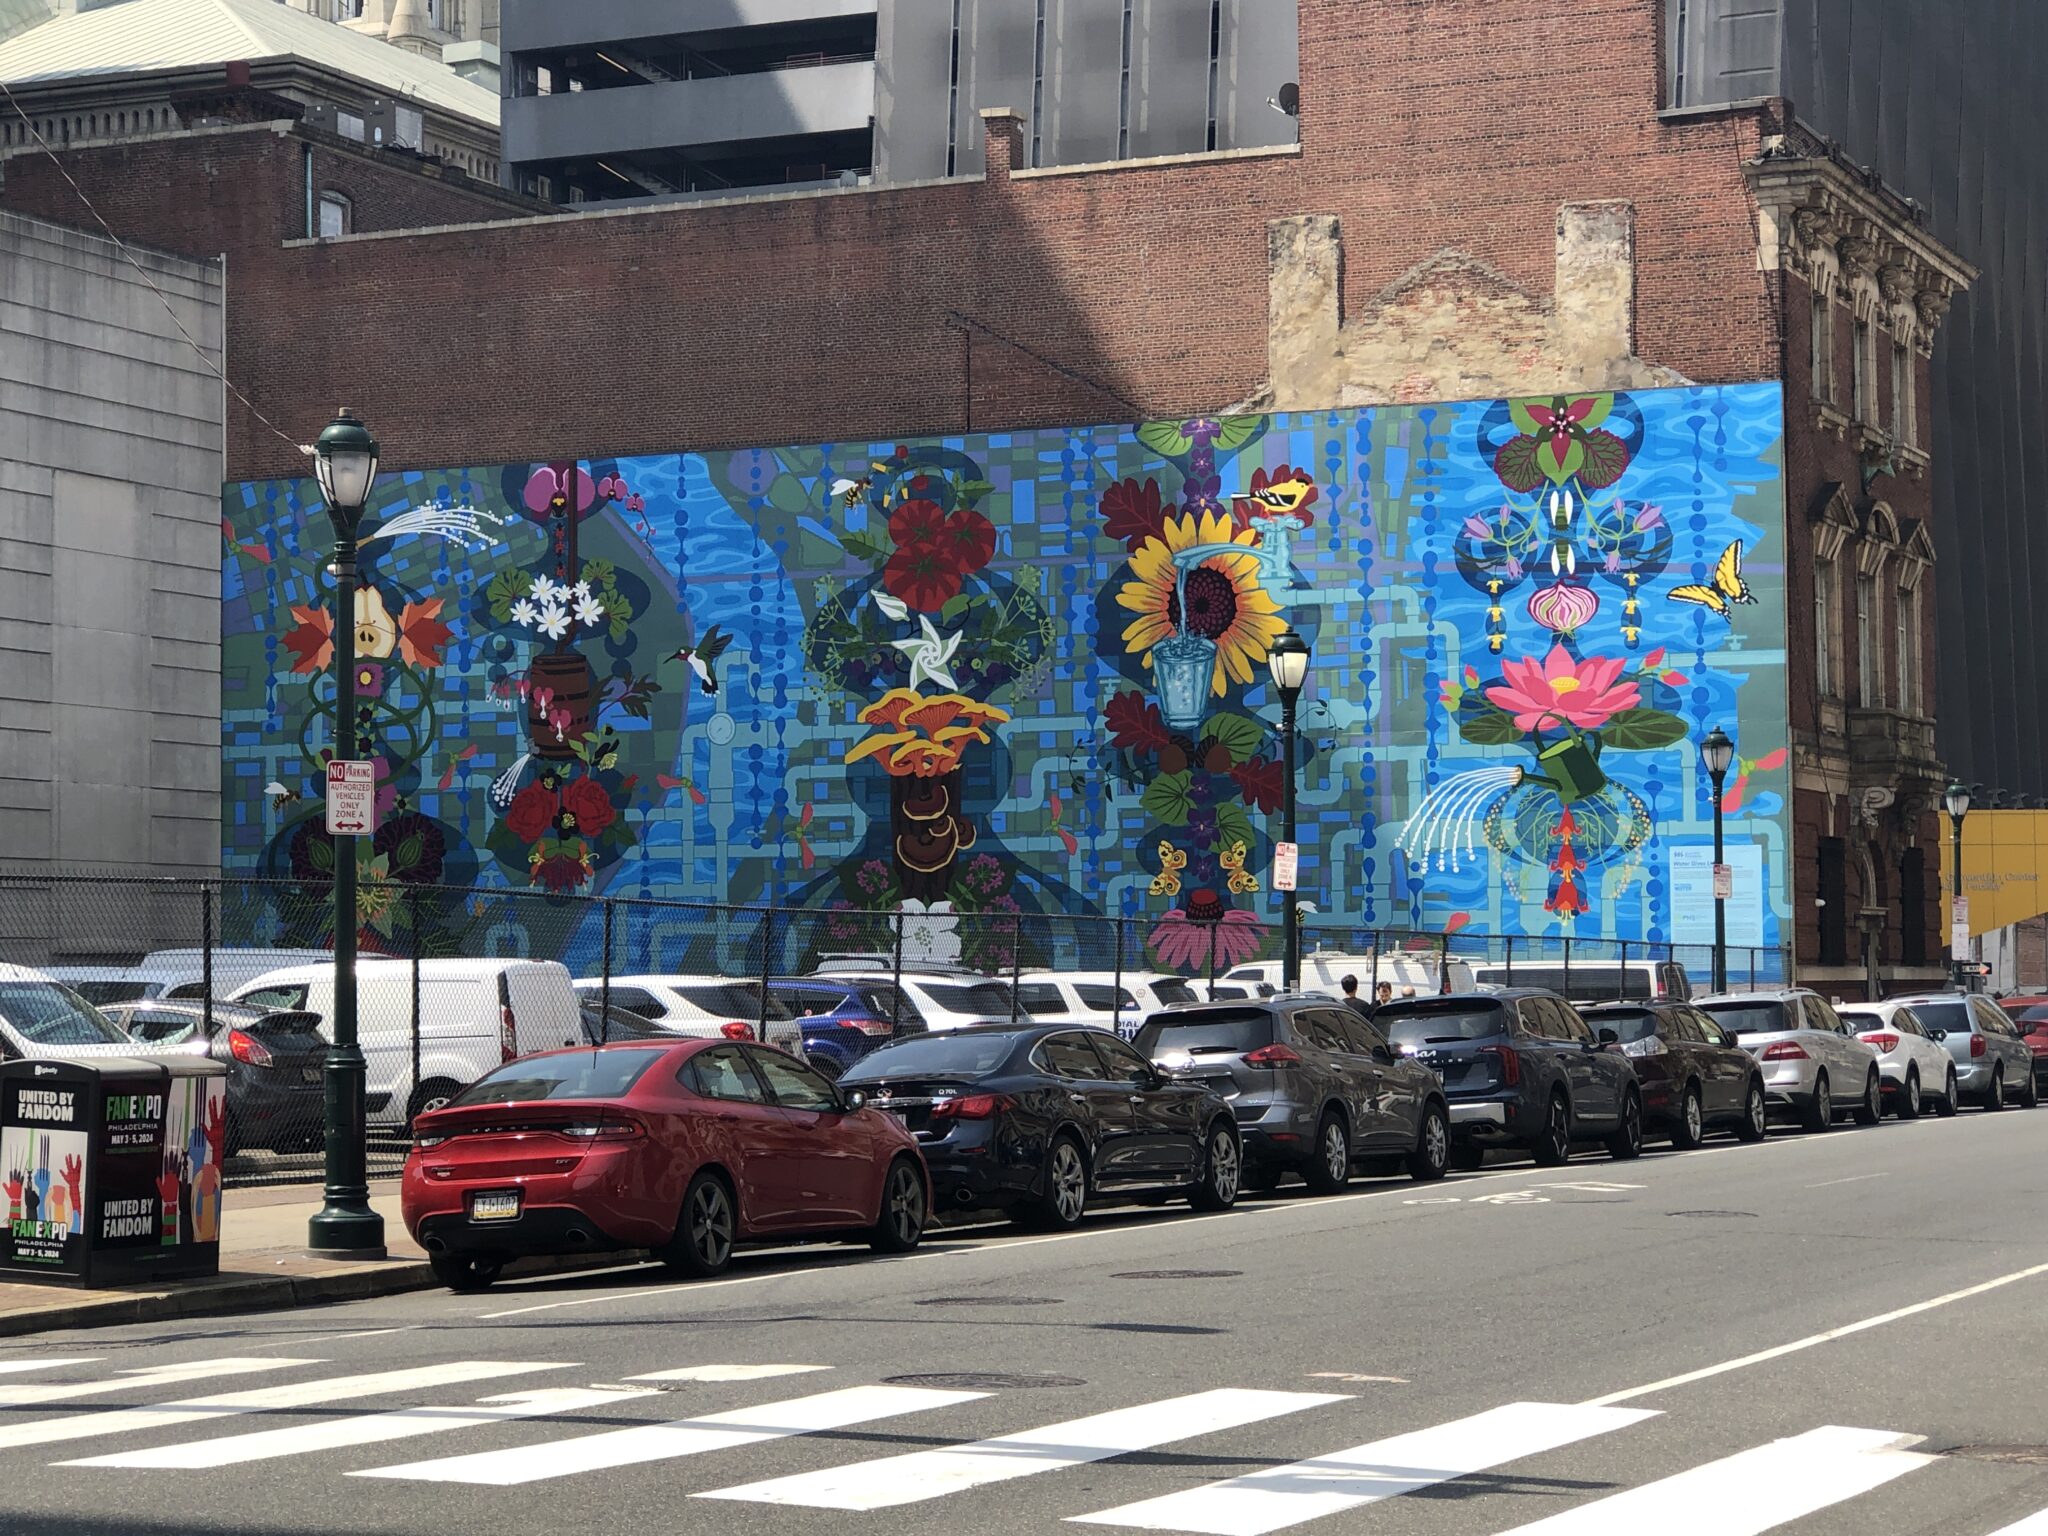 Water Gives Life mural, located on Arch St in Philadelphia. Photo by Hilary Reeves.